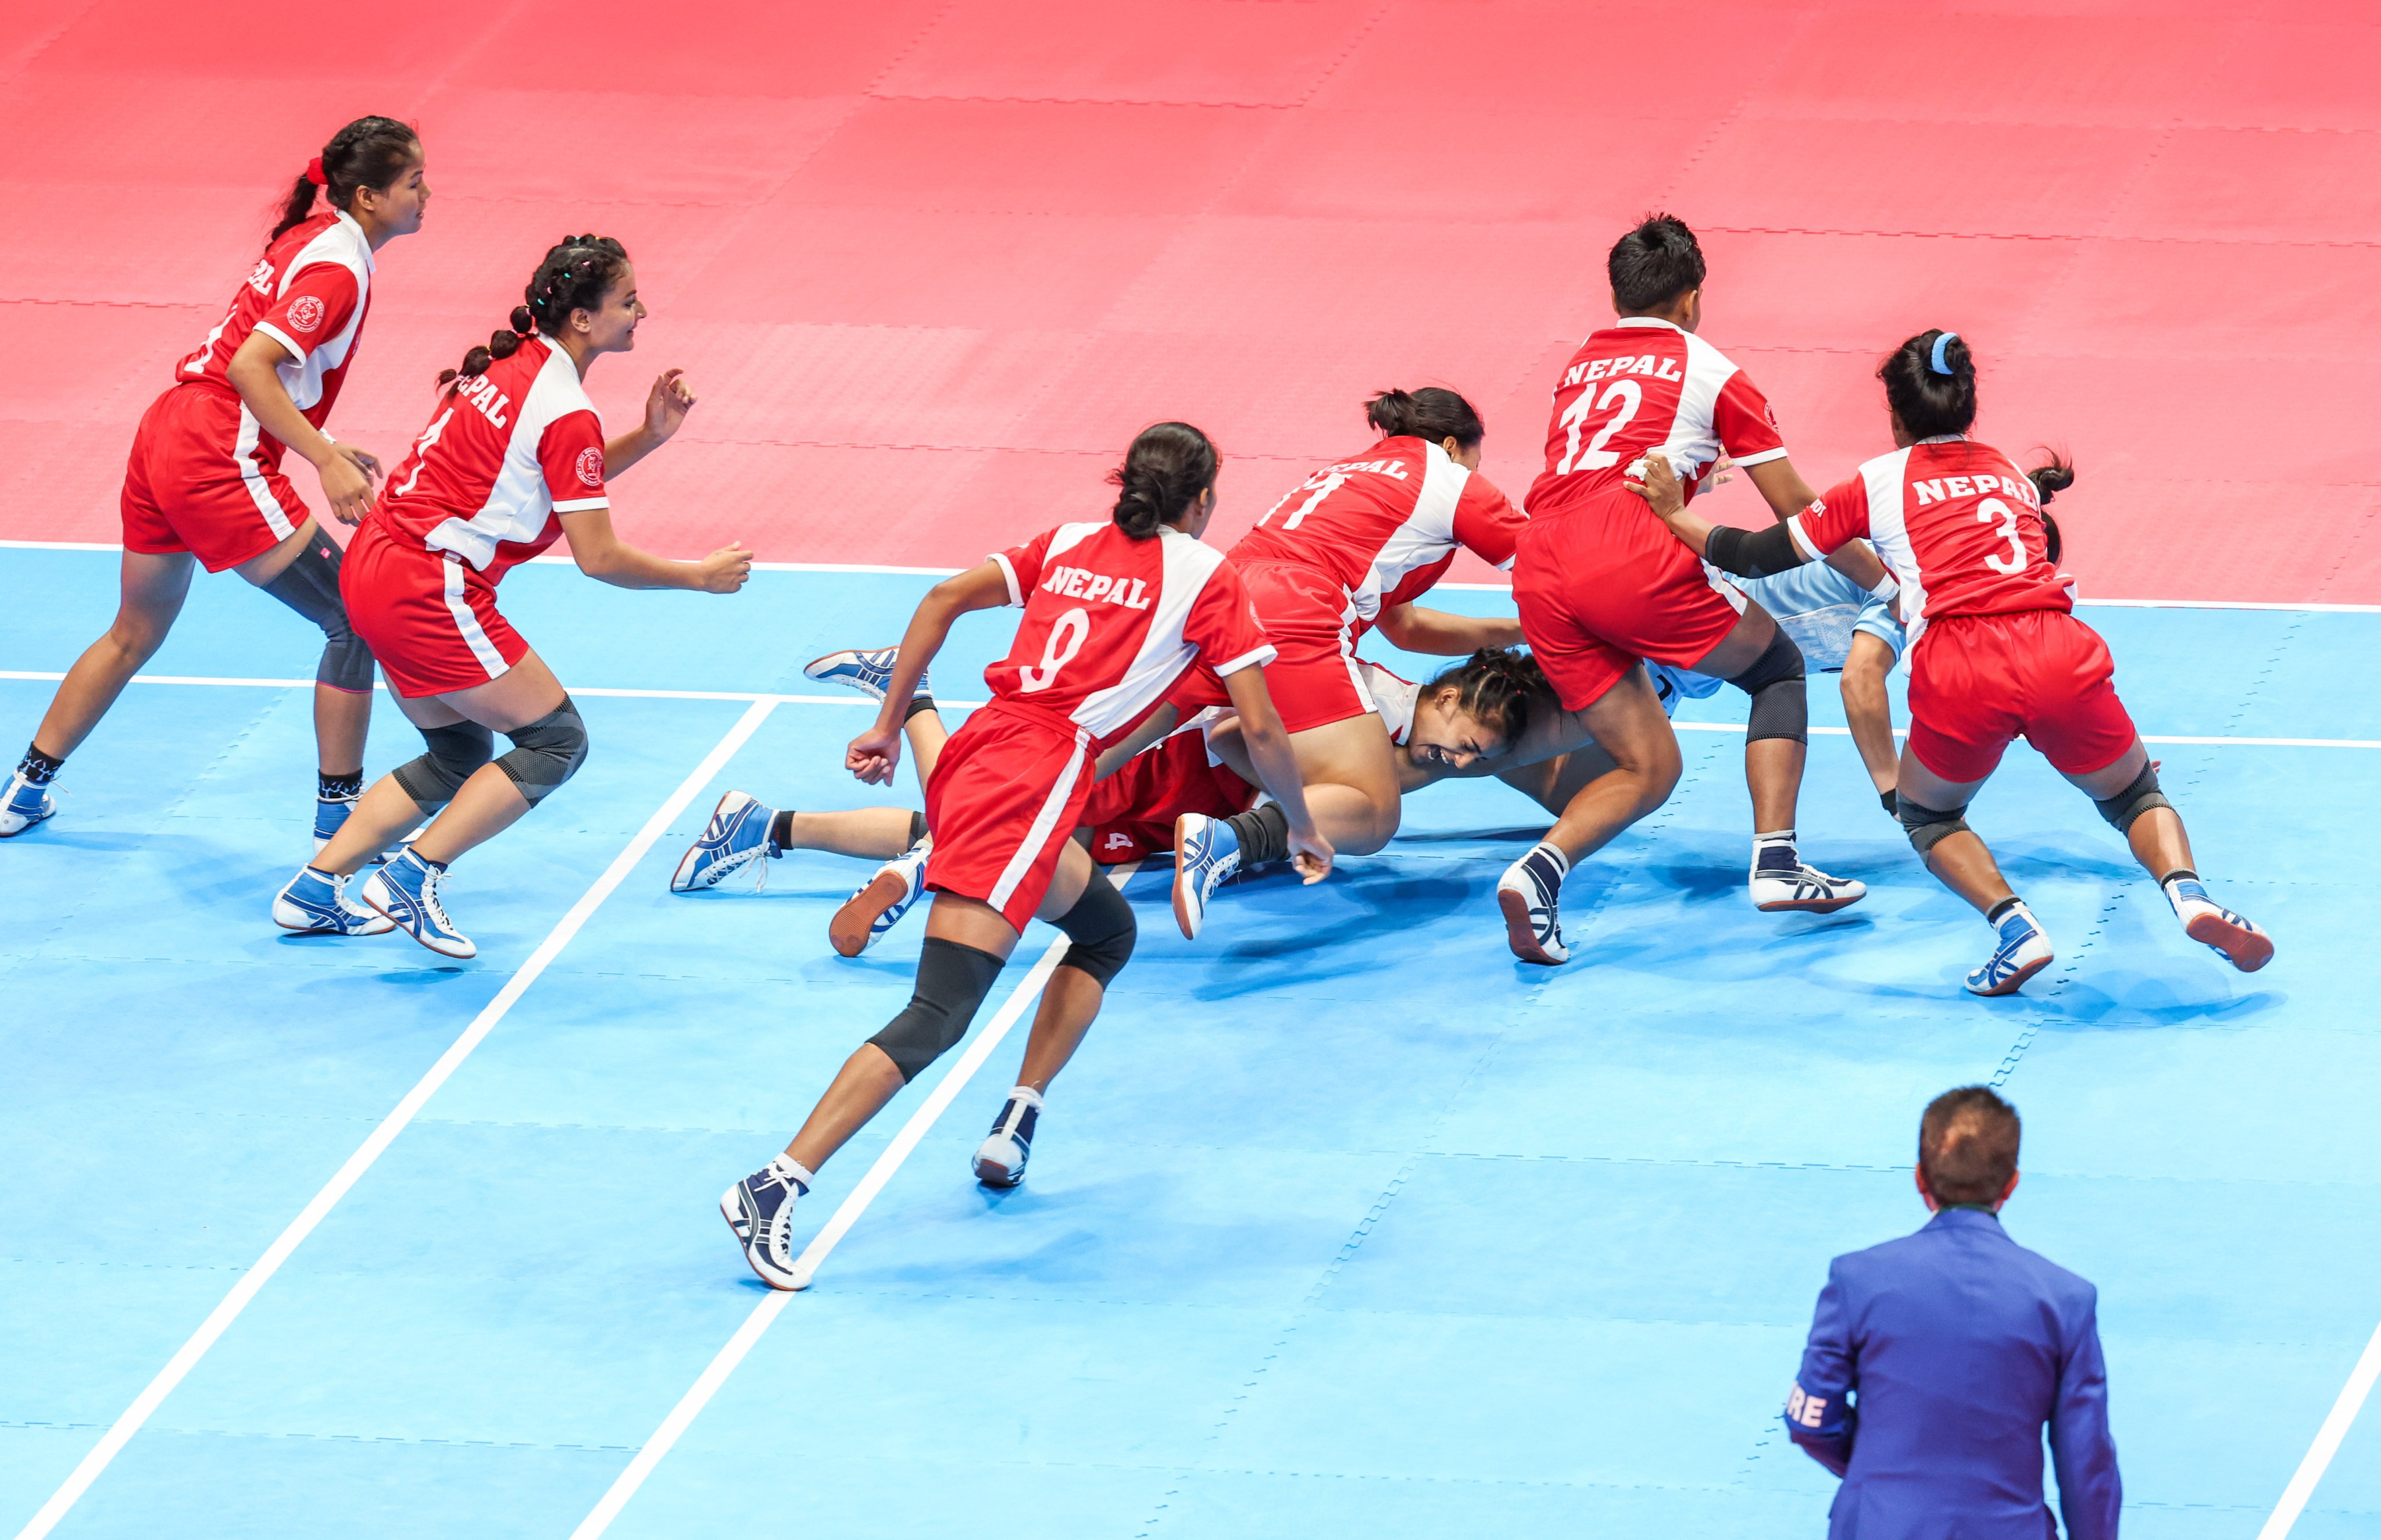 Nepal’s kabaddi players compete against India during the women’s team semi-final at the 19th Asian Games in Hangzhou. Photo: Xinhua